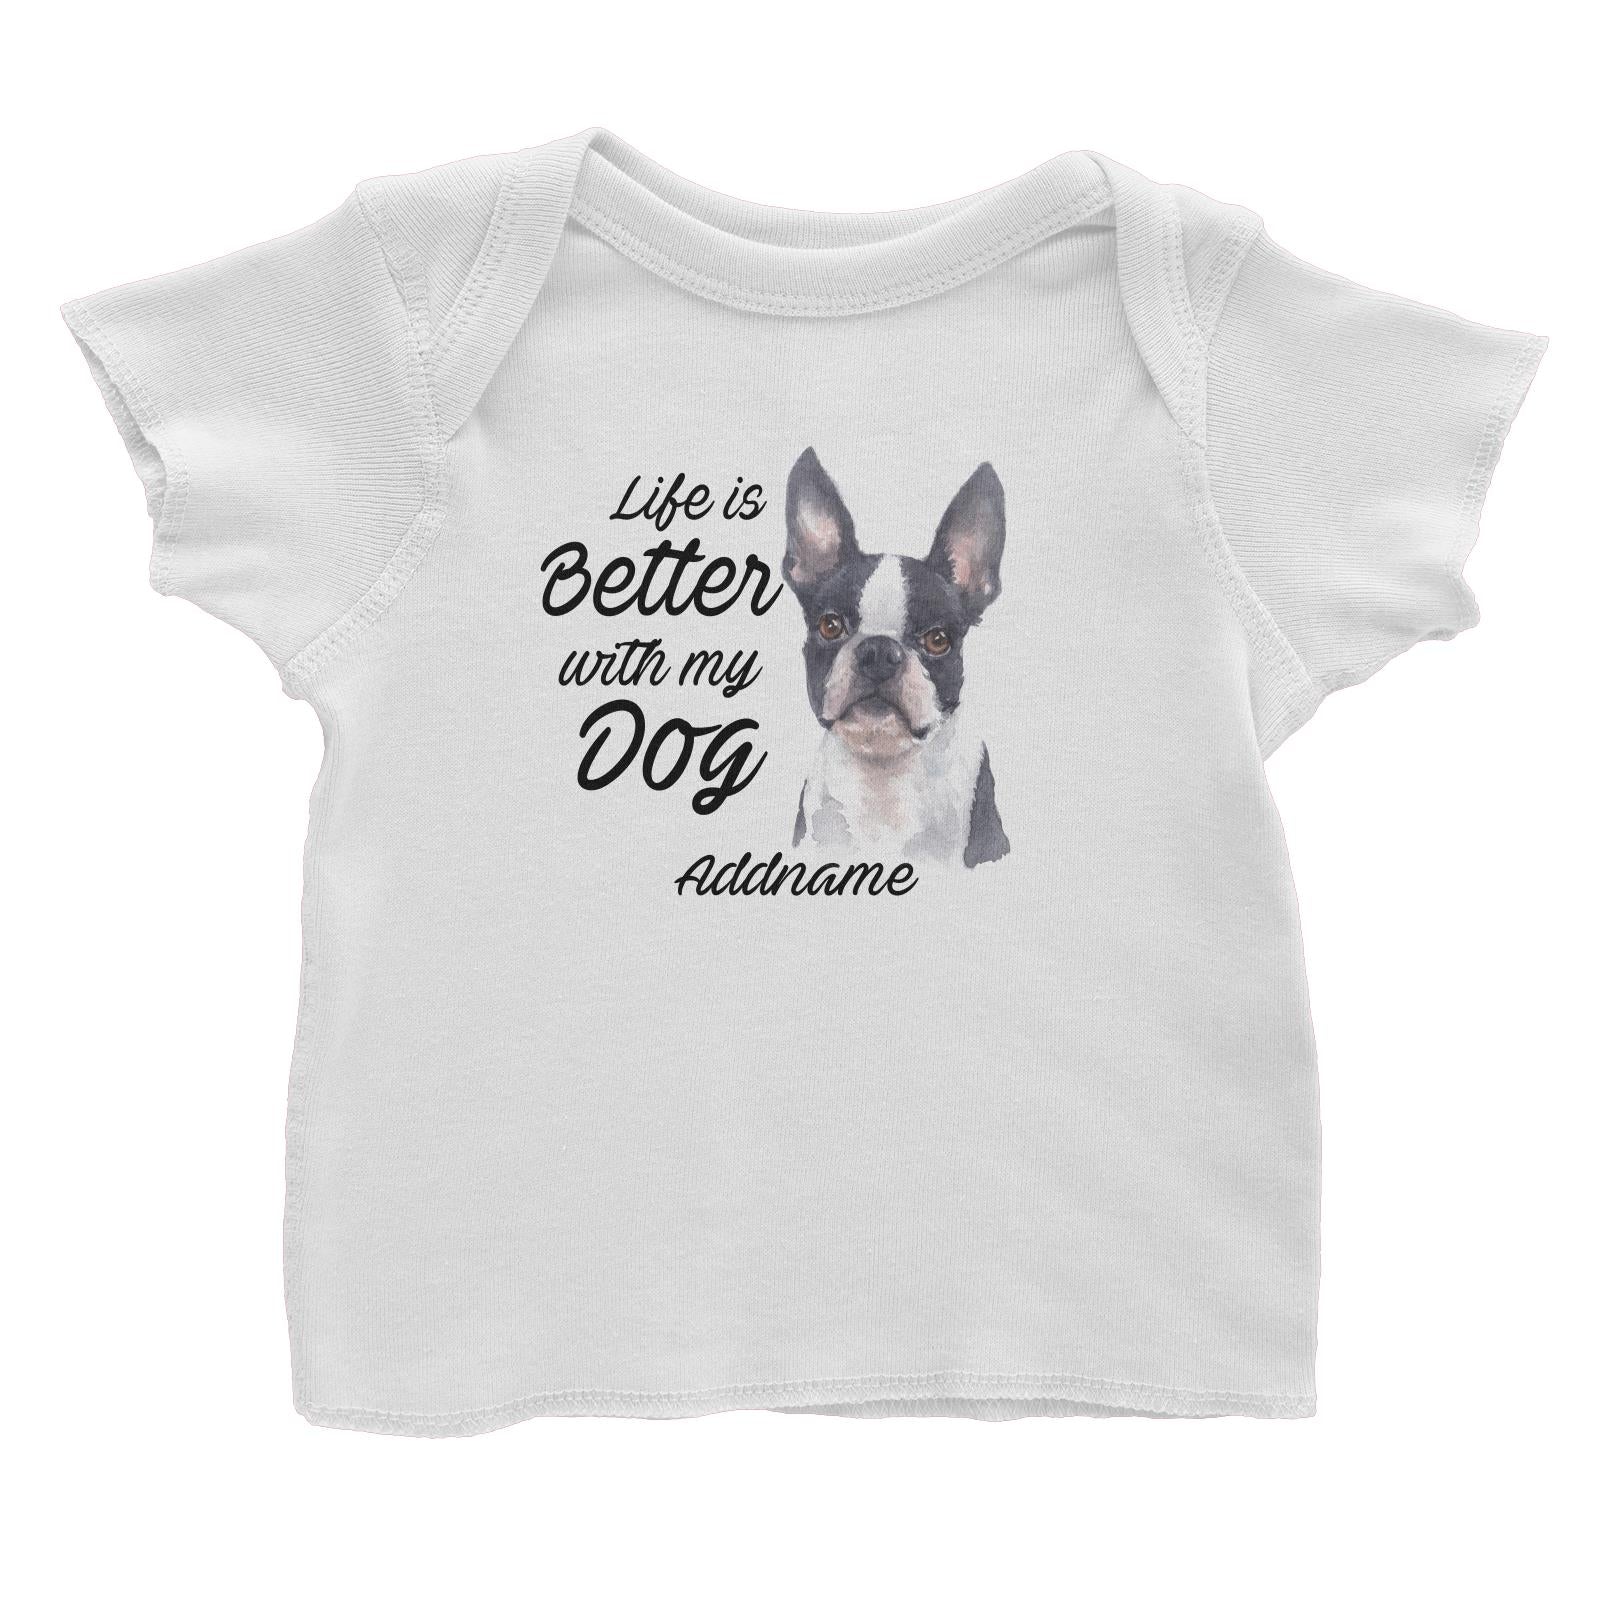 Watercolor Life is Better With My Dog Boston Addname Baby T-Shirt